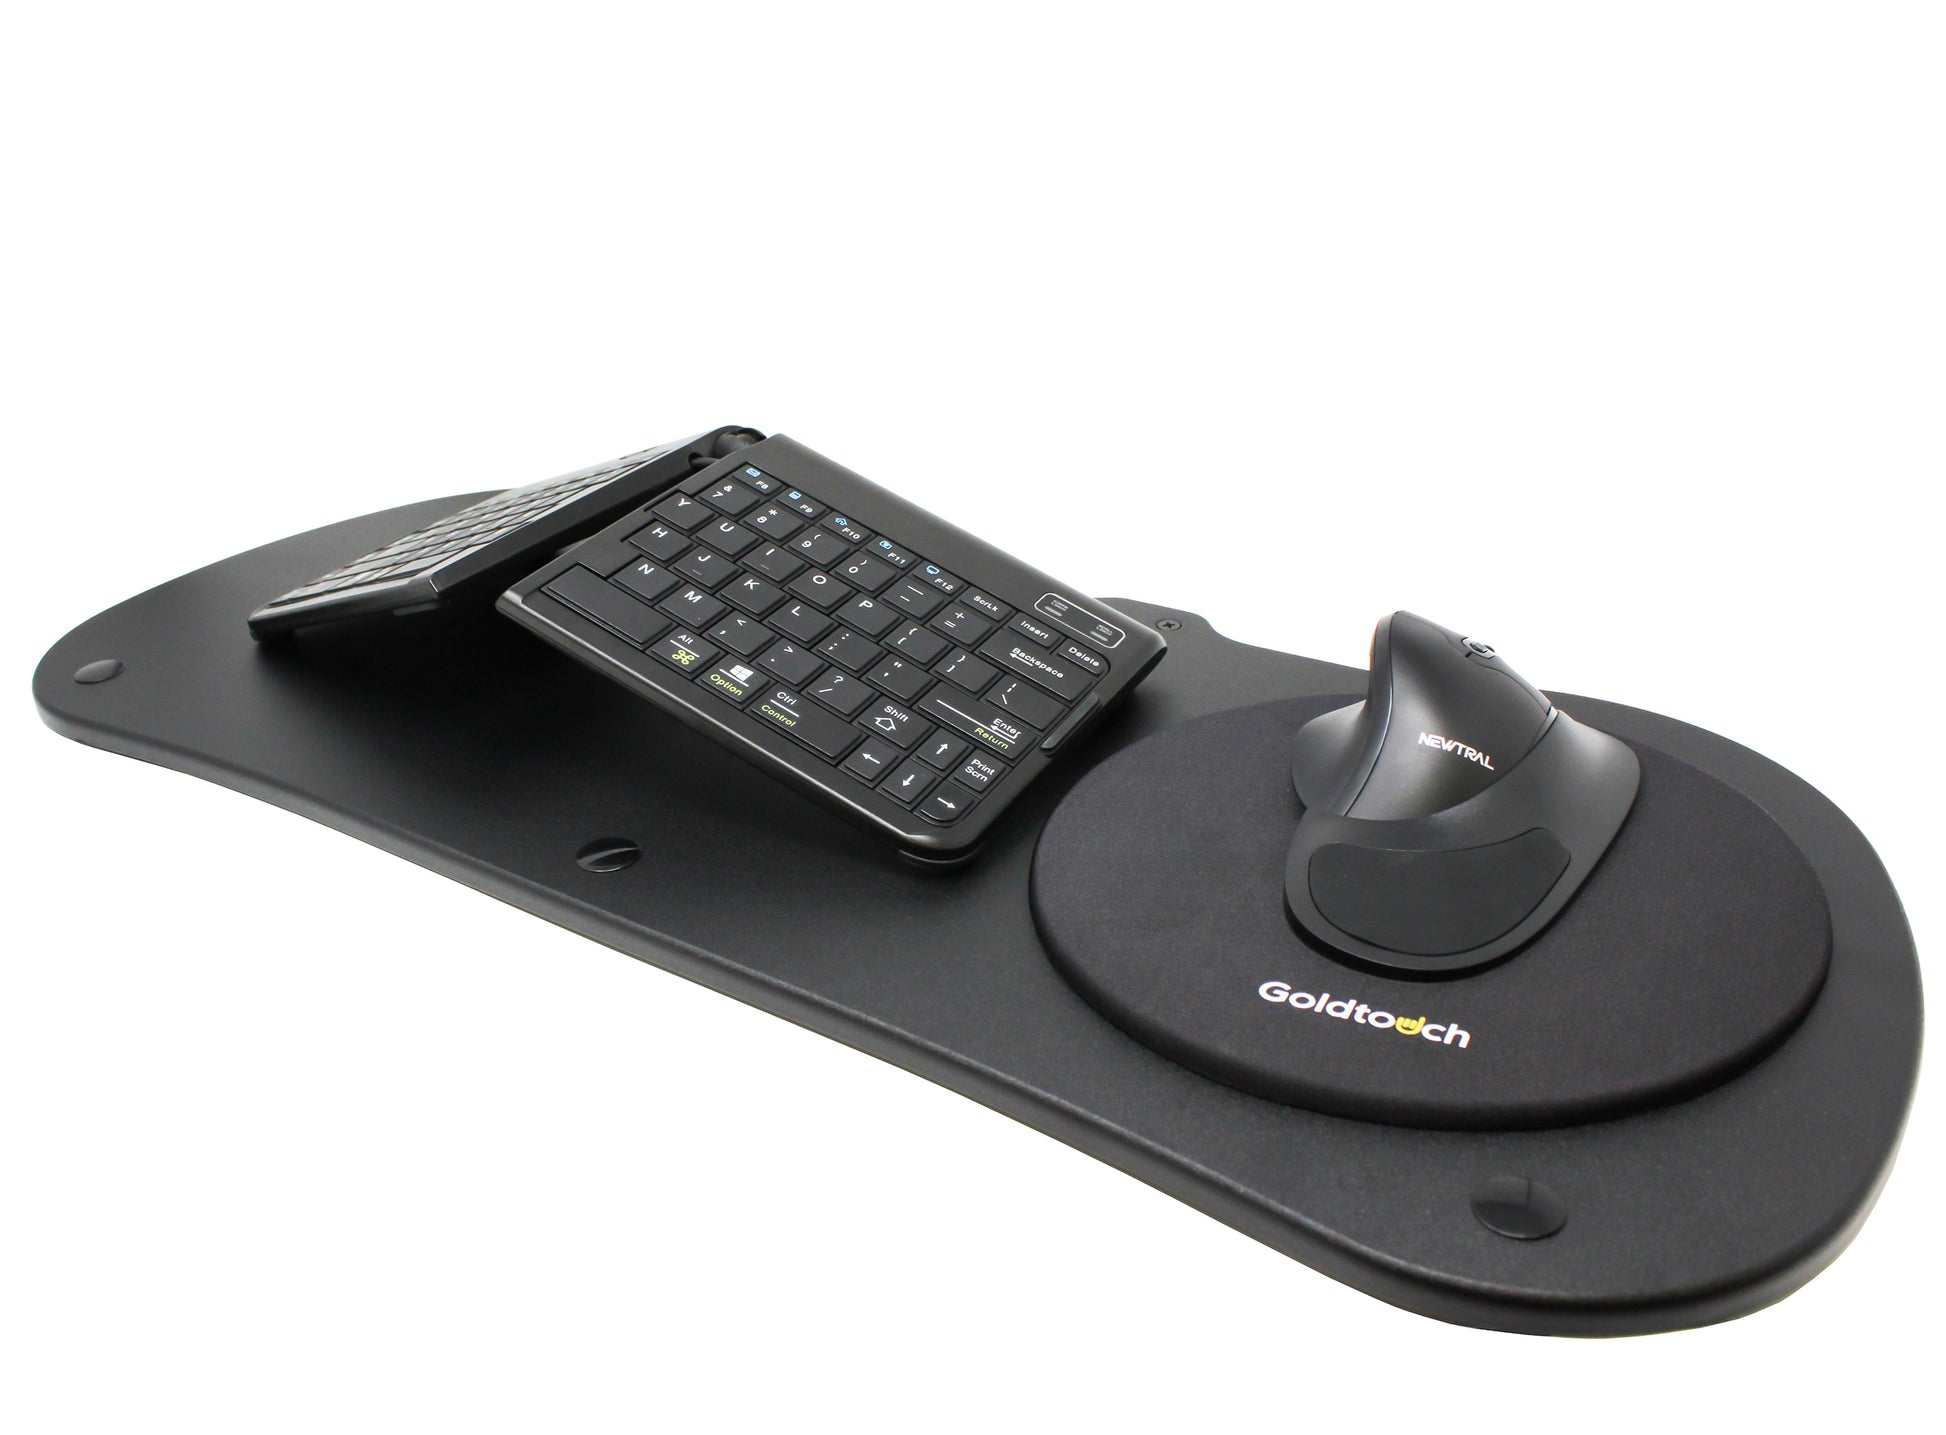 Goldtouch Black Gel Pad Mouse Round Accessory - Filled EasyLift Desk